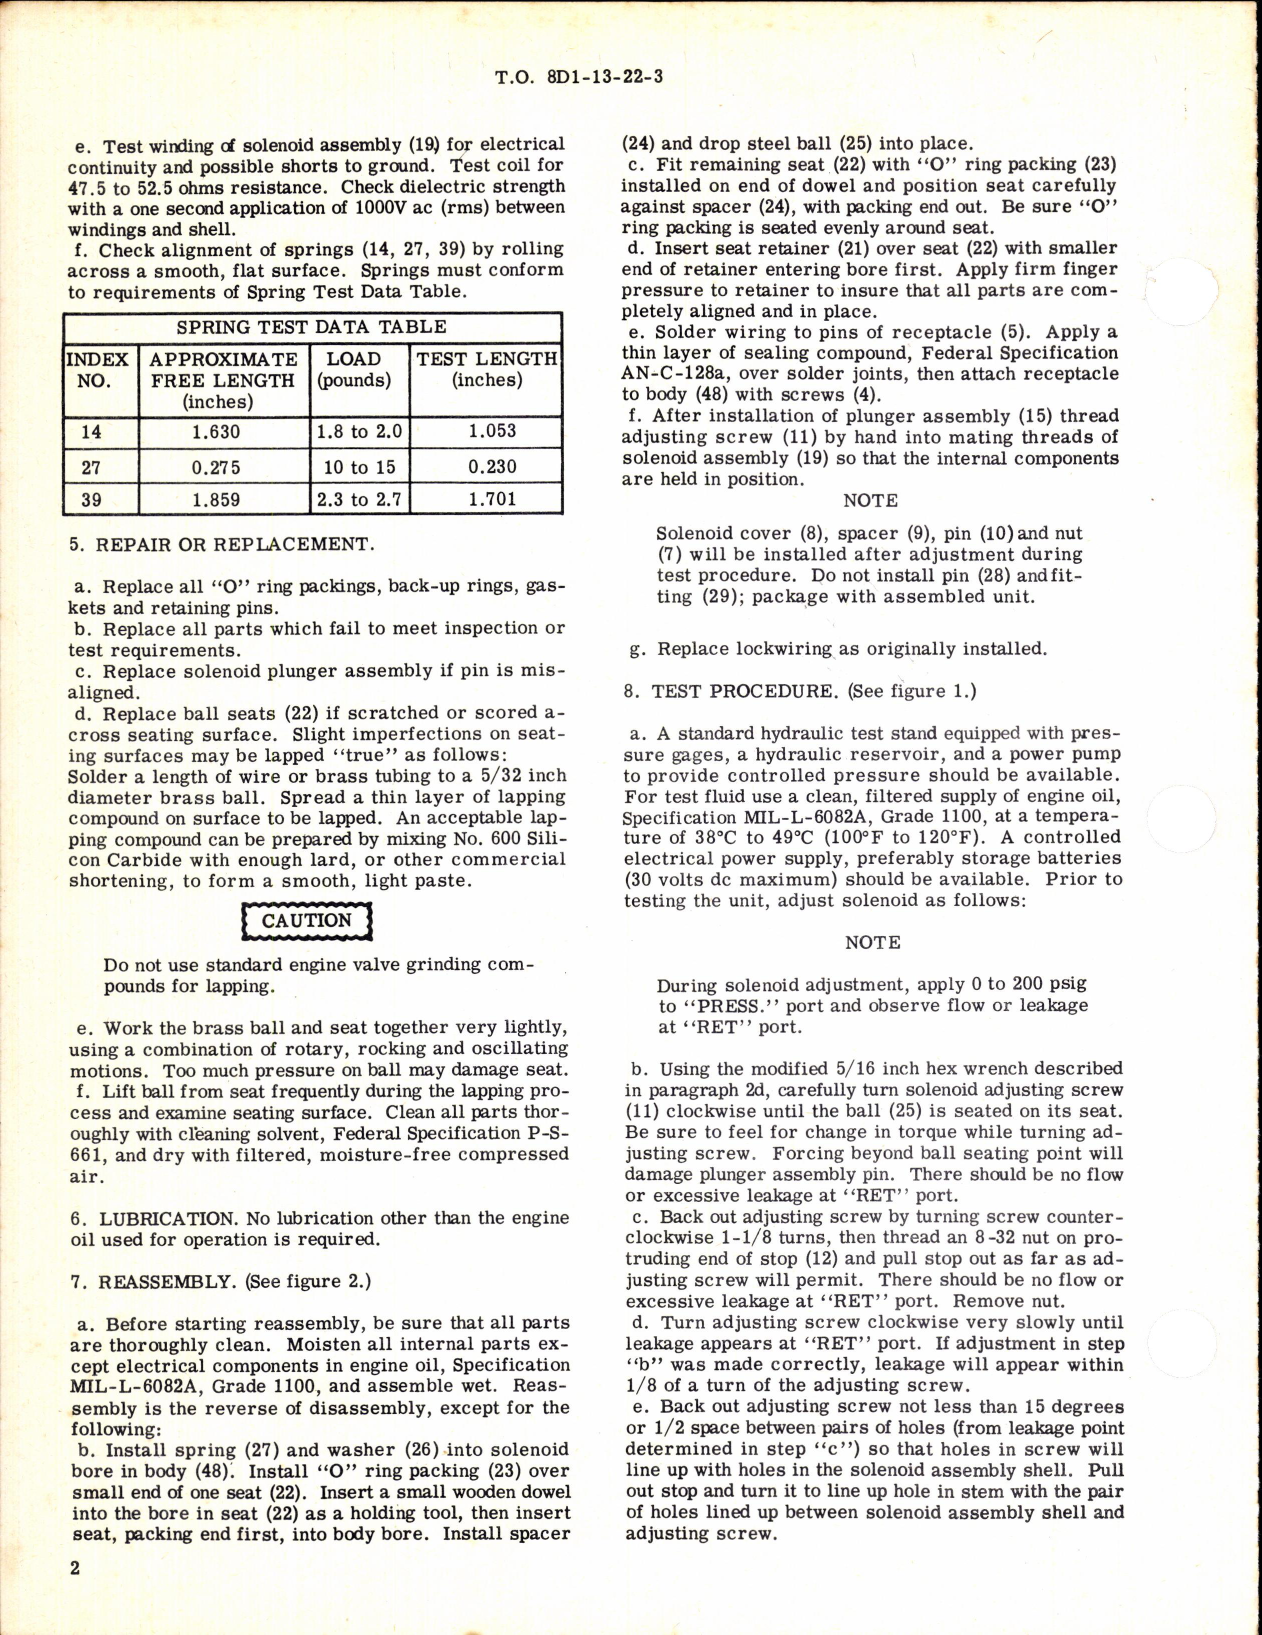 Sample page 2 from AirCorps Library document: Superchargher Actuators 25805 and 25805-2